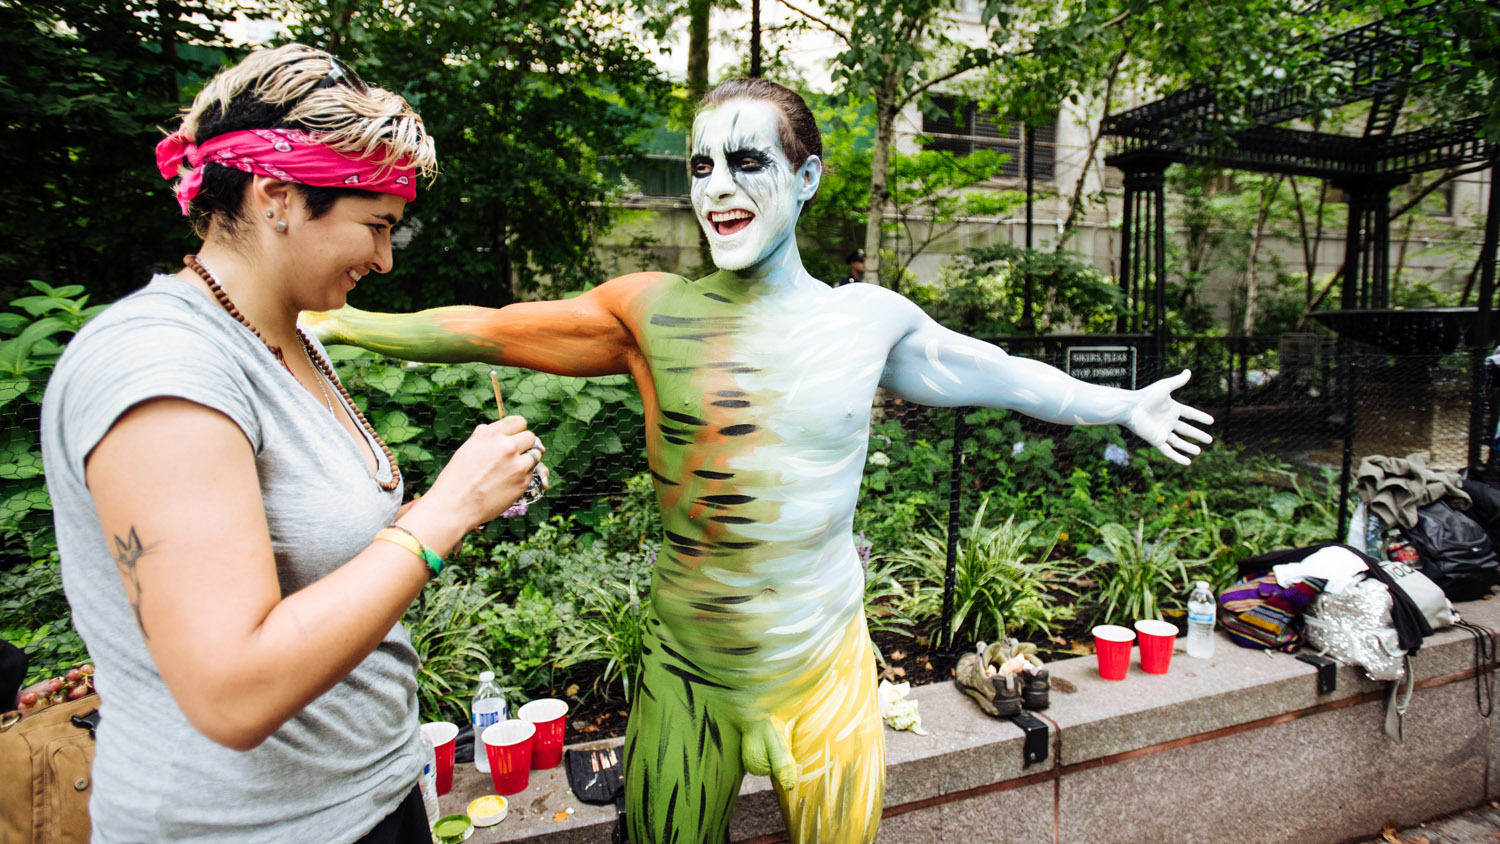 nyc gay pride 2019 body painting day